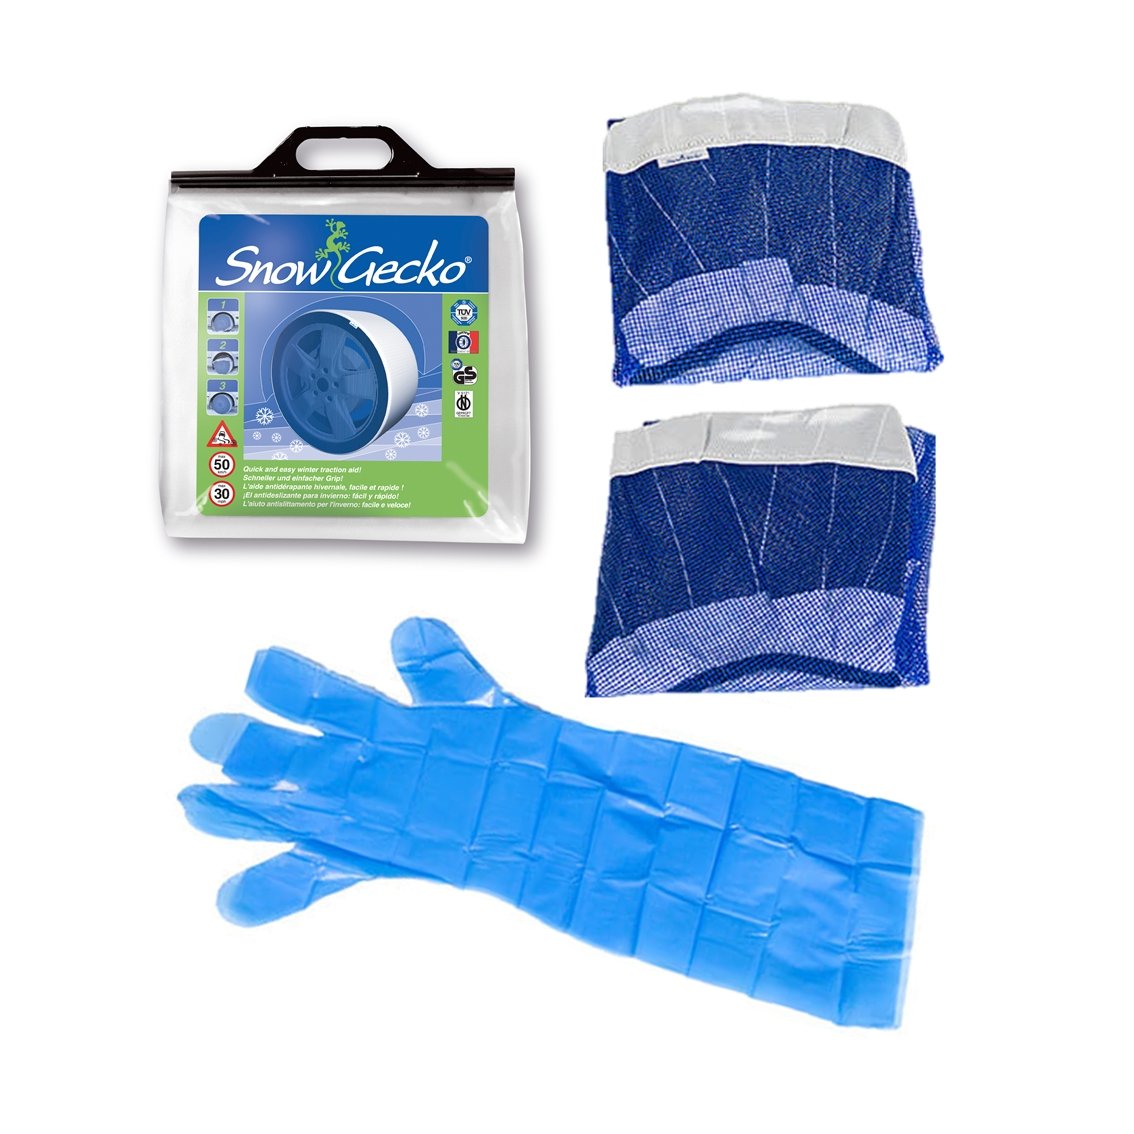 SnowGecko XL bag includes a pair of tire socks and gloves